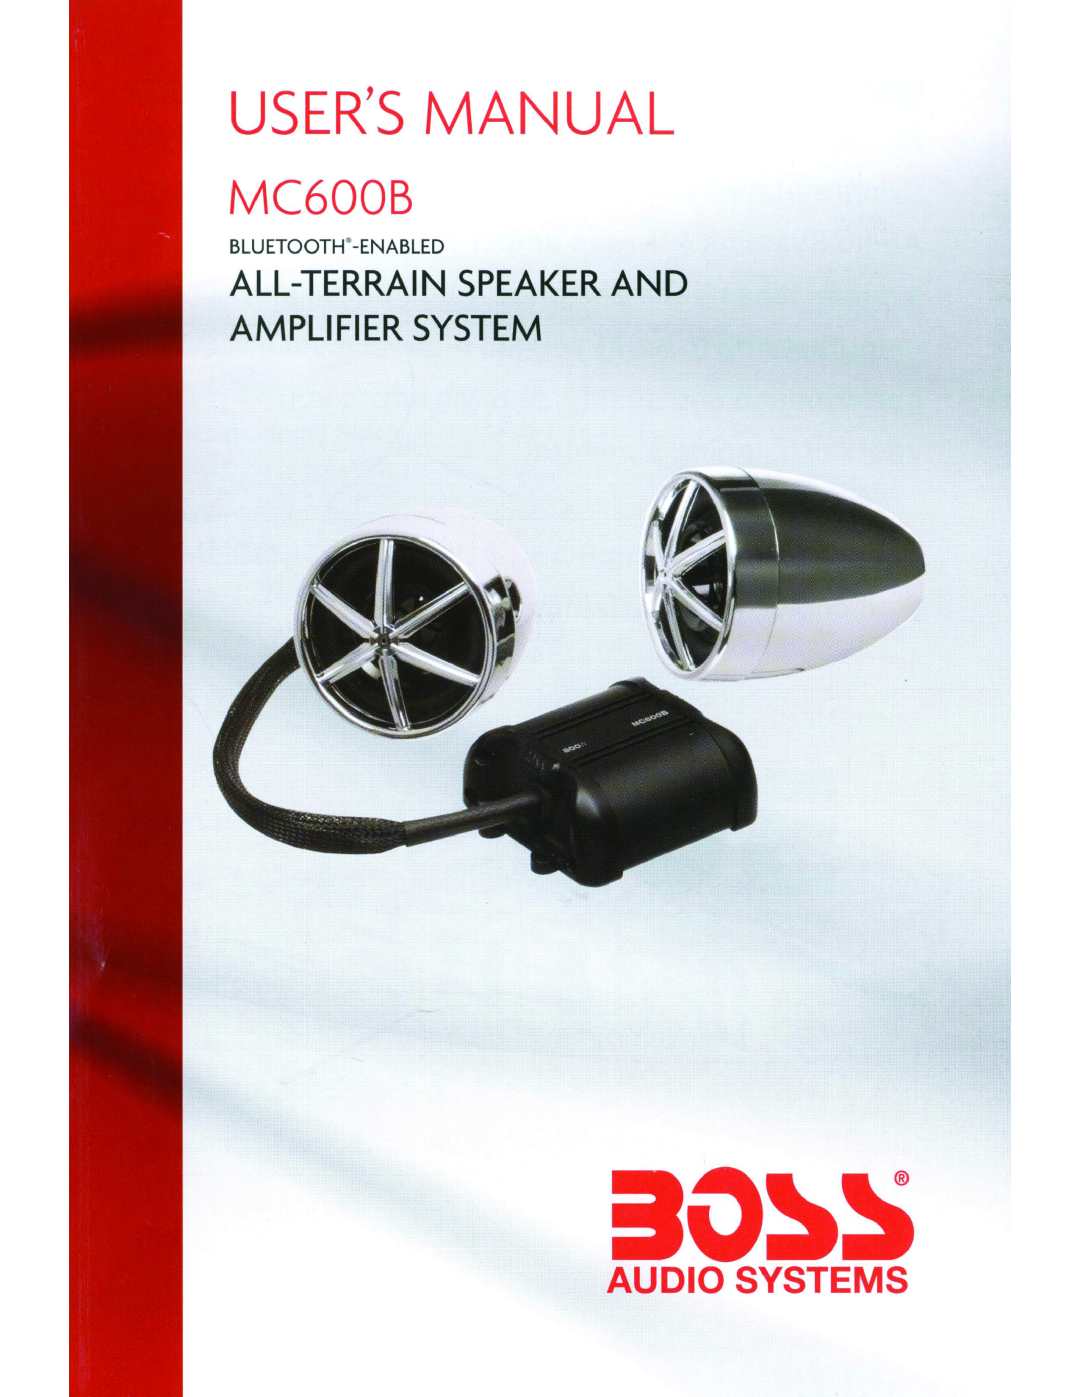 Boss Audio Systems MC600B user manual All-Terrainspeaker And Amplifier System, Audio Systems, ao~s, Bluetooth-Enabled 